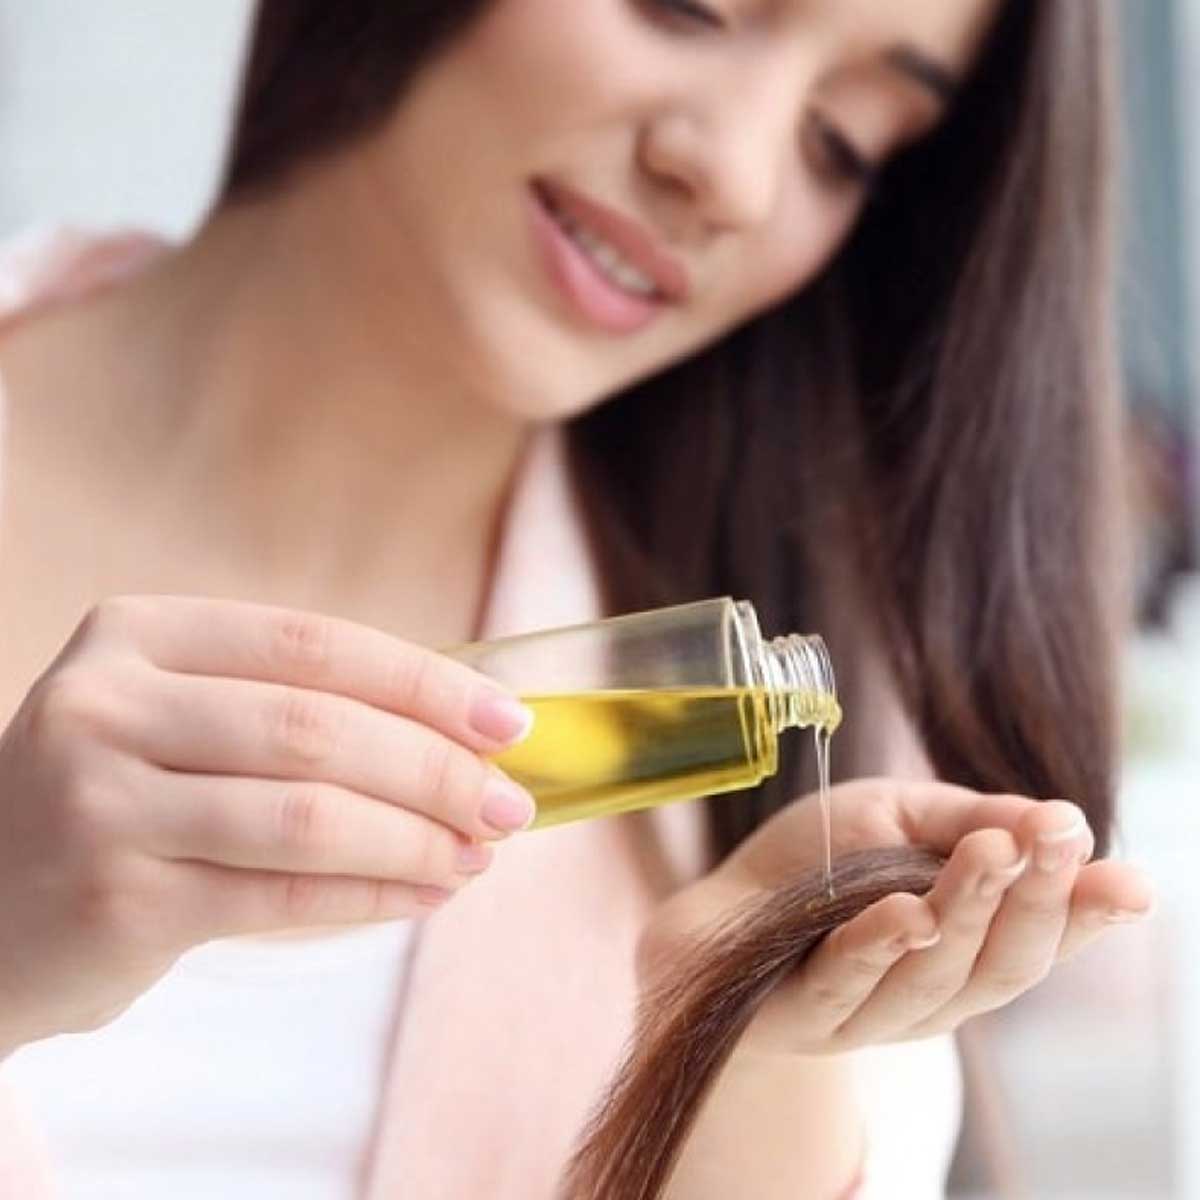 Natural Ways to Prevent Hair Fall